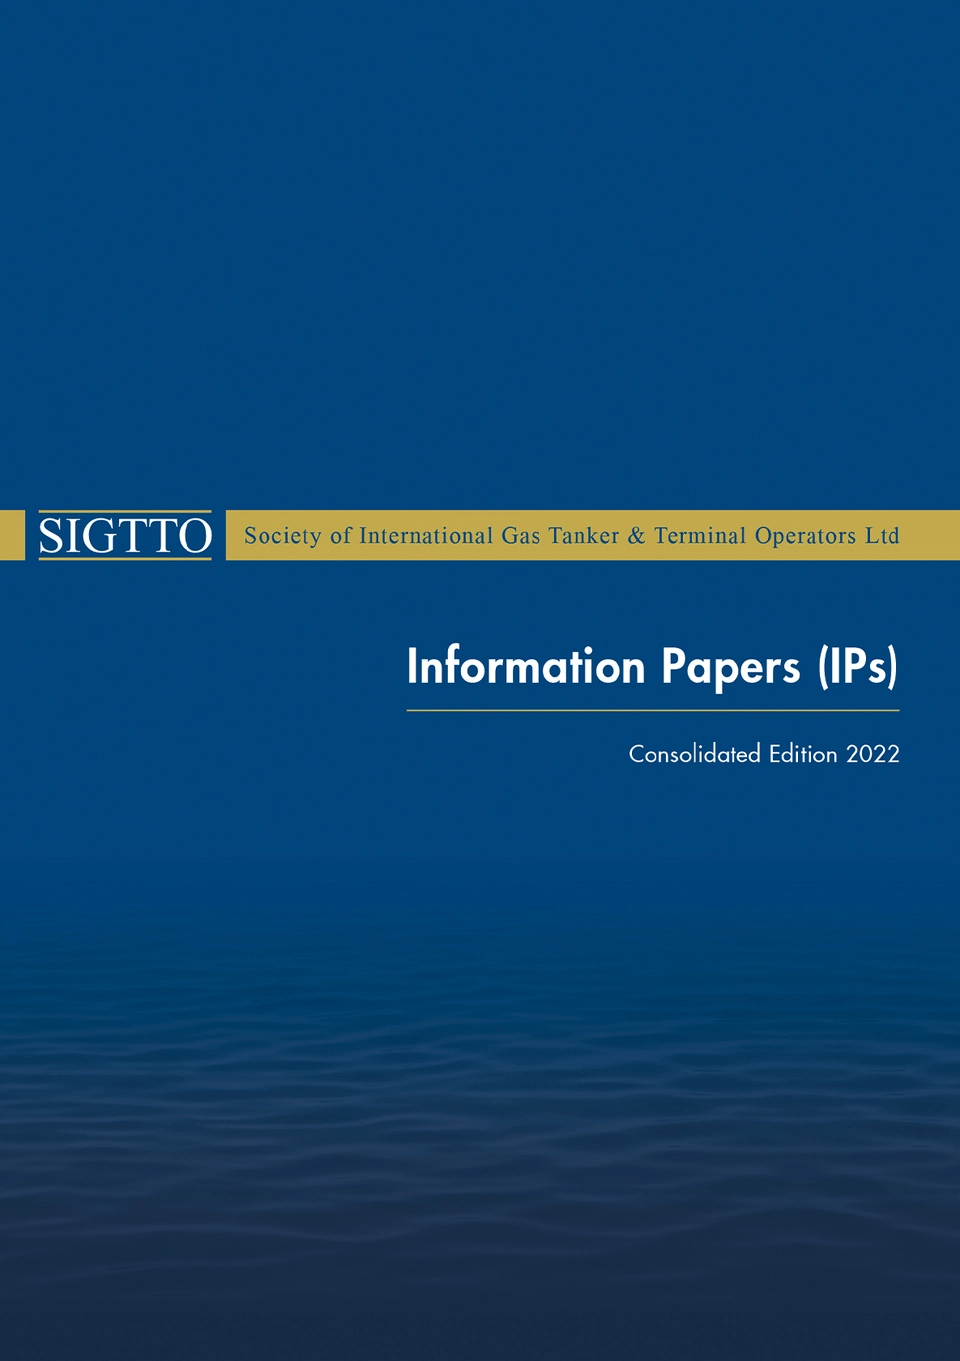 SIGTTO Information Papers - Consolidated Edition 2022